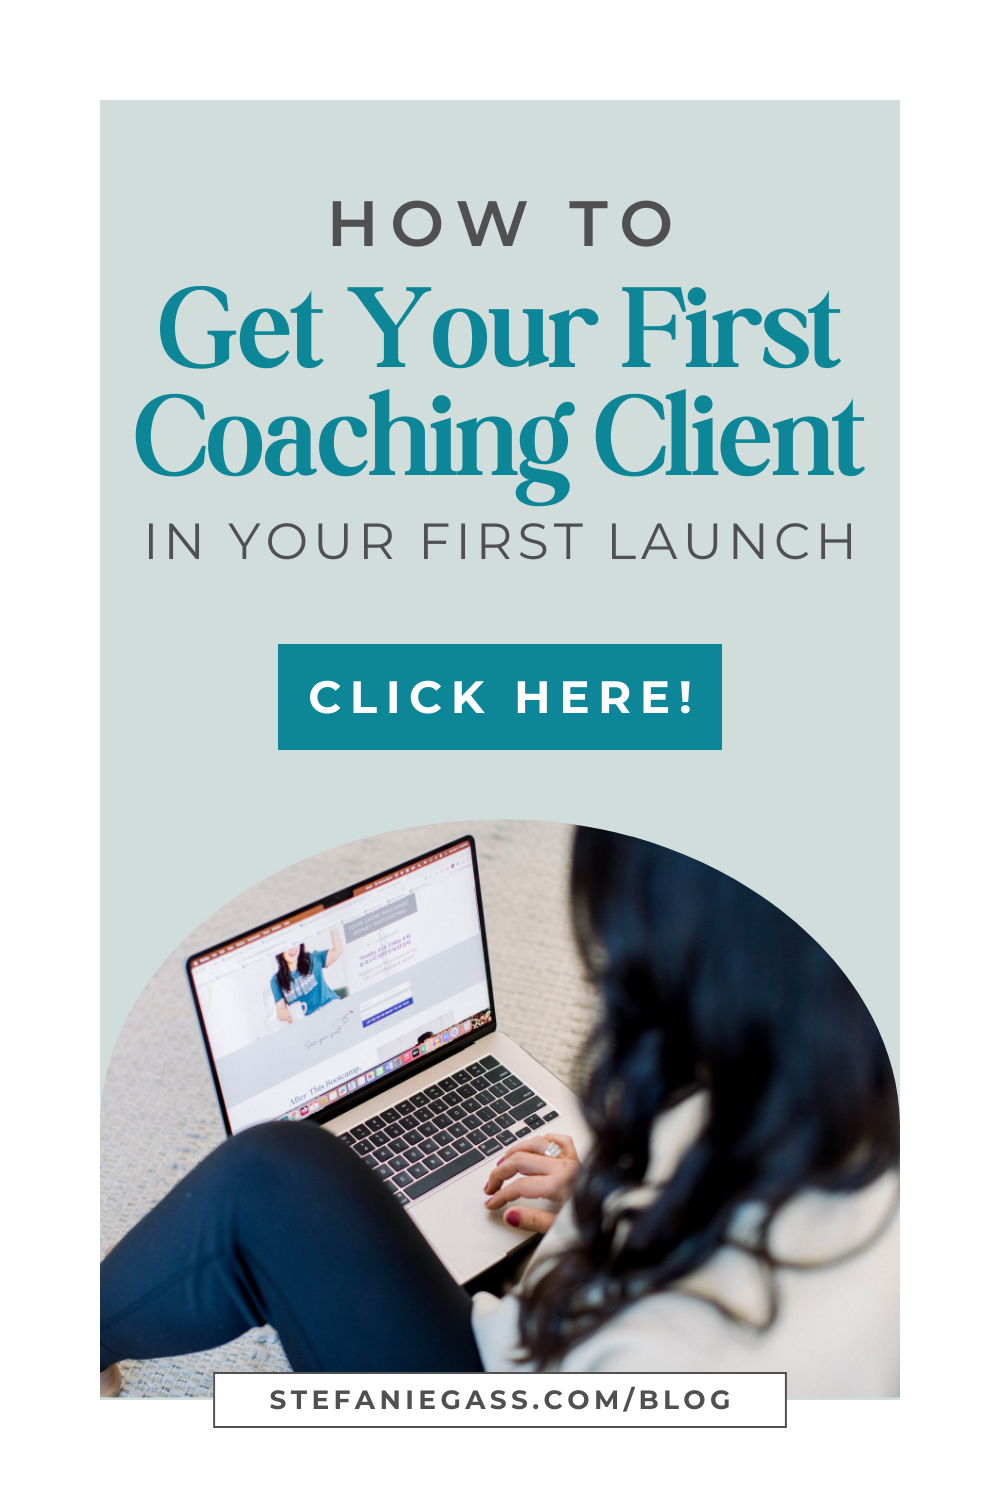 Brown haired woman sitting at computer typing. Text Says: How to get your first coaching client in your first launch. Click here.